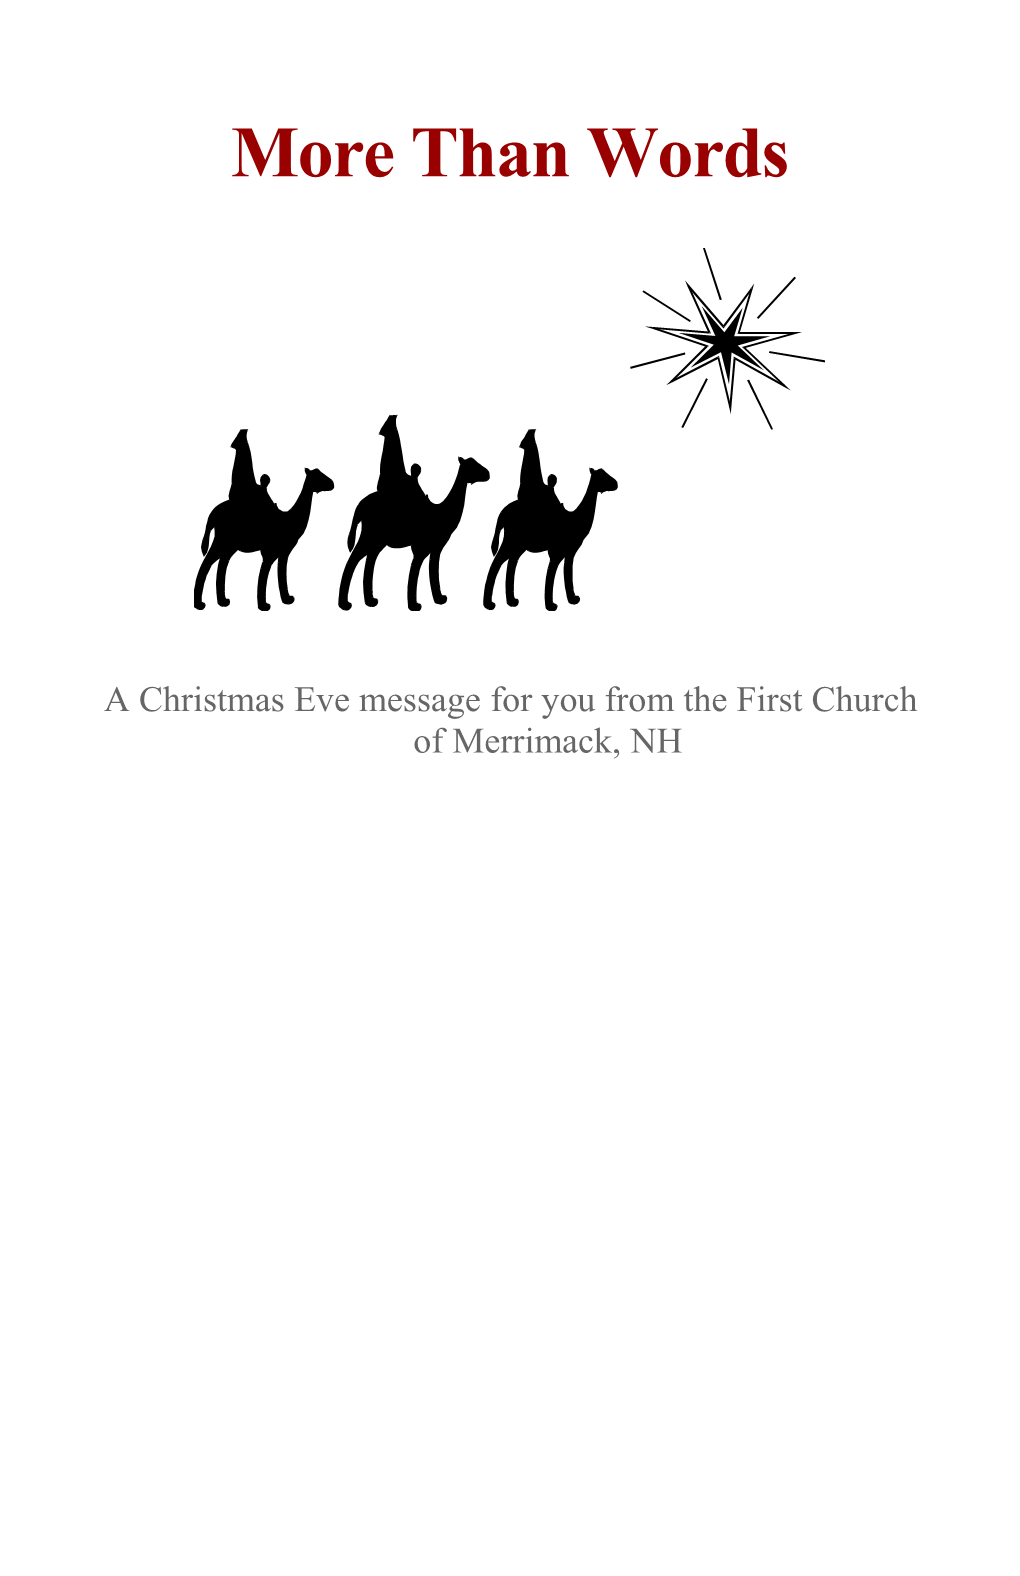 A Christmas Eve Message for You from the First Church of Merrimack, NH